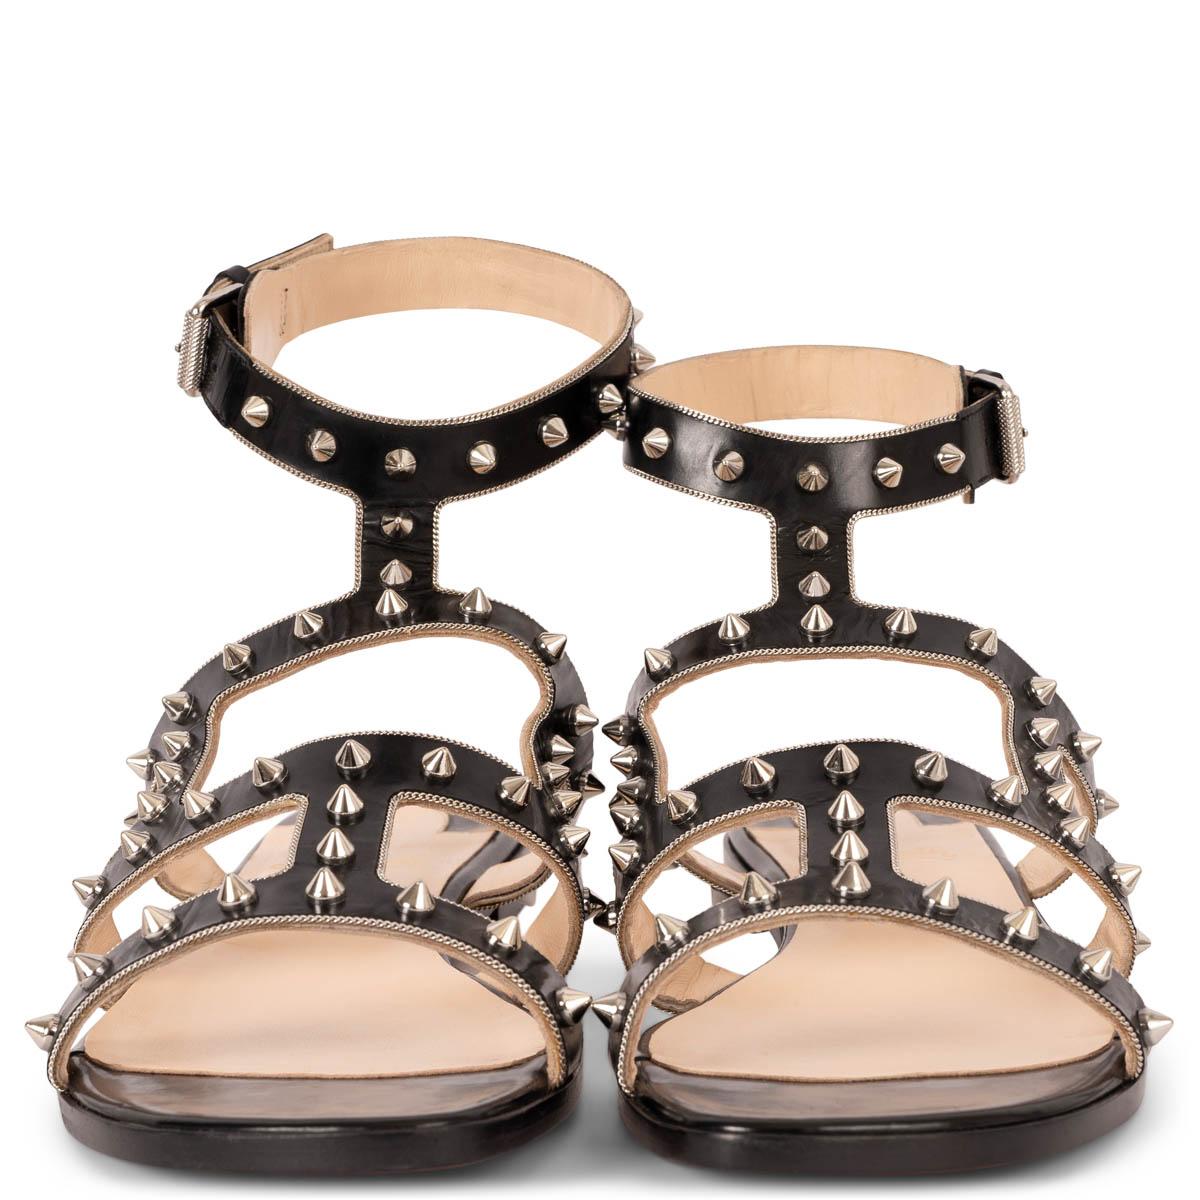 100% authentic Christian Louboutin Sexistrapi Gladiator sandals in black Jazz calf leather  embellished with silver-tone spikes. Brand new. Come with dust bags. 

Measurements
Imprinted Size	39
Shoe Size	38.5
Inside Sole	25.5cm (9.9in)
Width	7.5cm